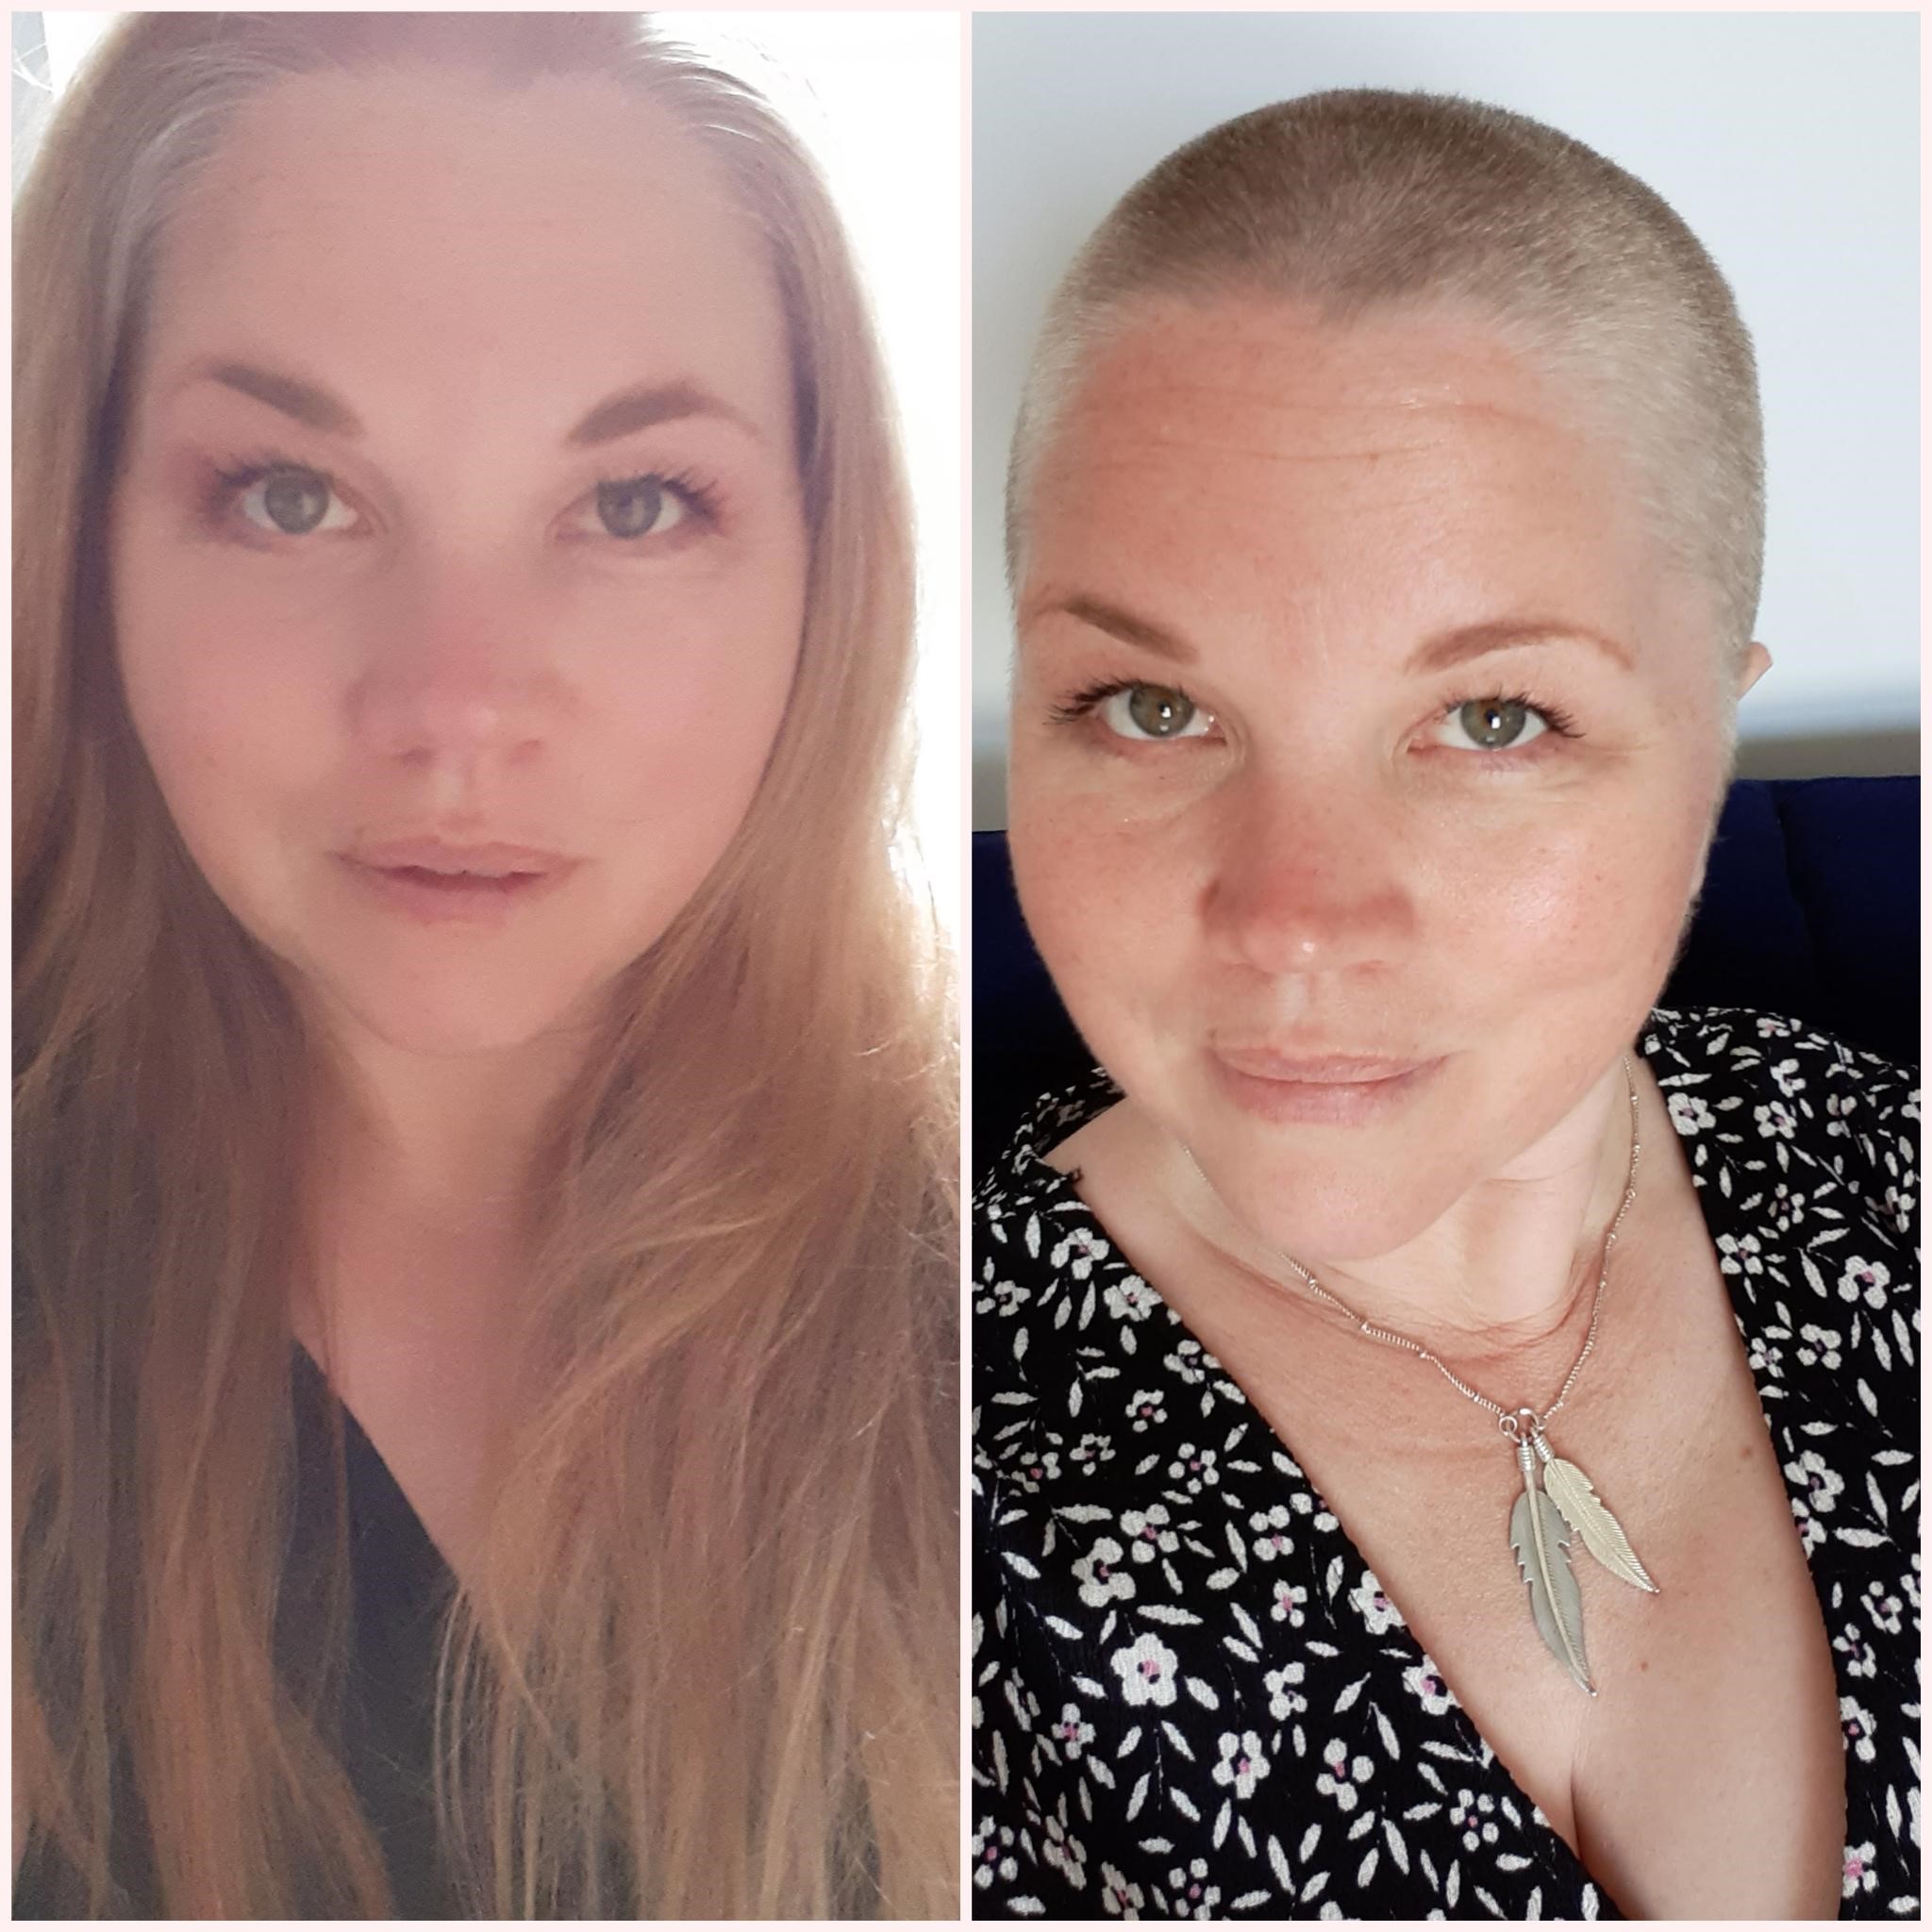 Sarah’s story: Why I shaved my hair for Hospiscare